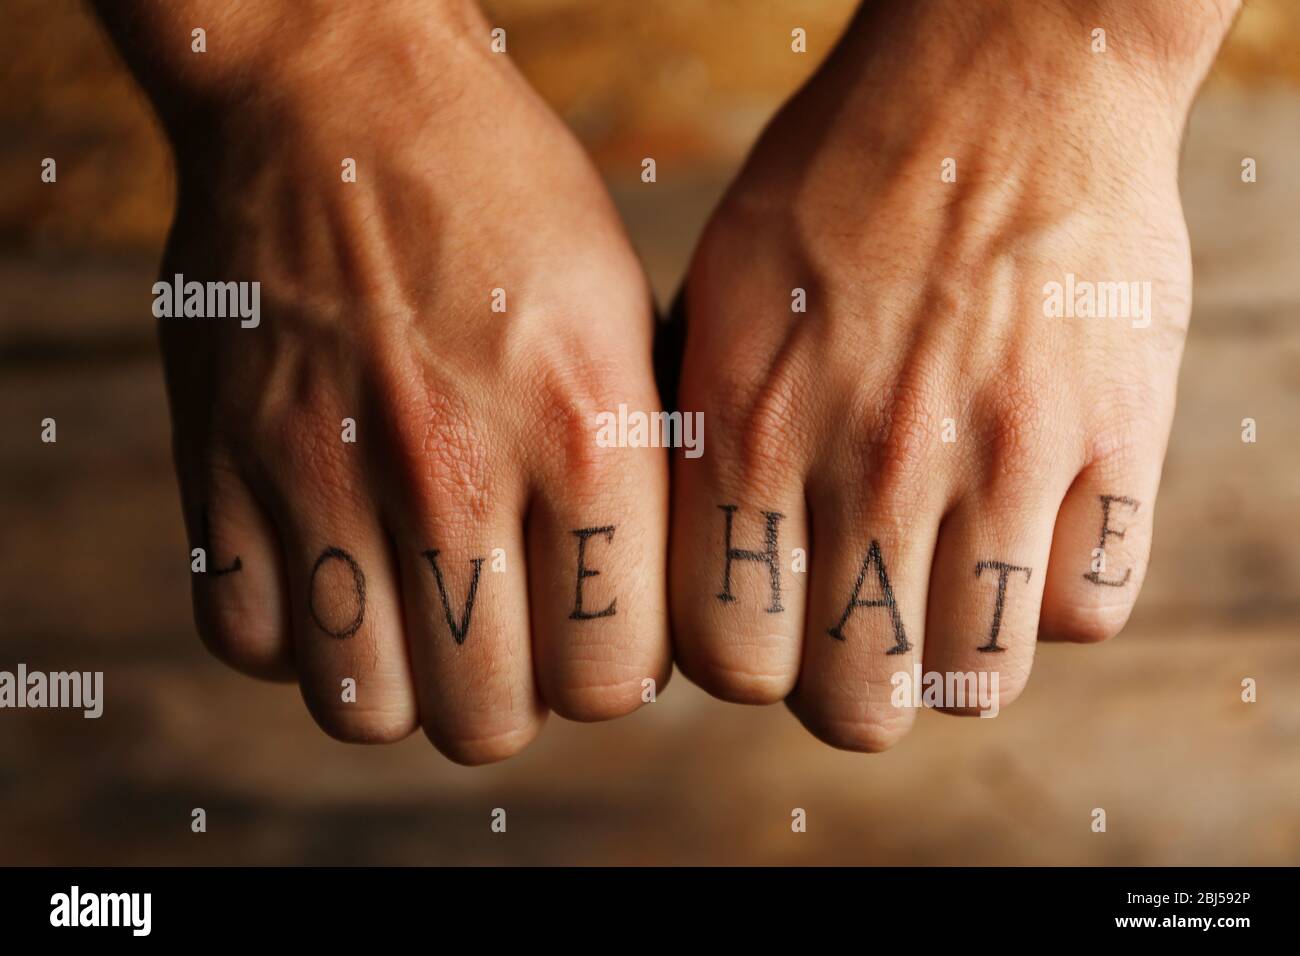 Love  Hate Ambigram Tattoo Instant Download Design  Stencil STYLE   Wow Tattoos